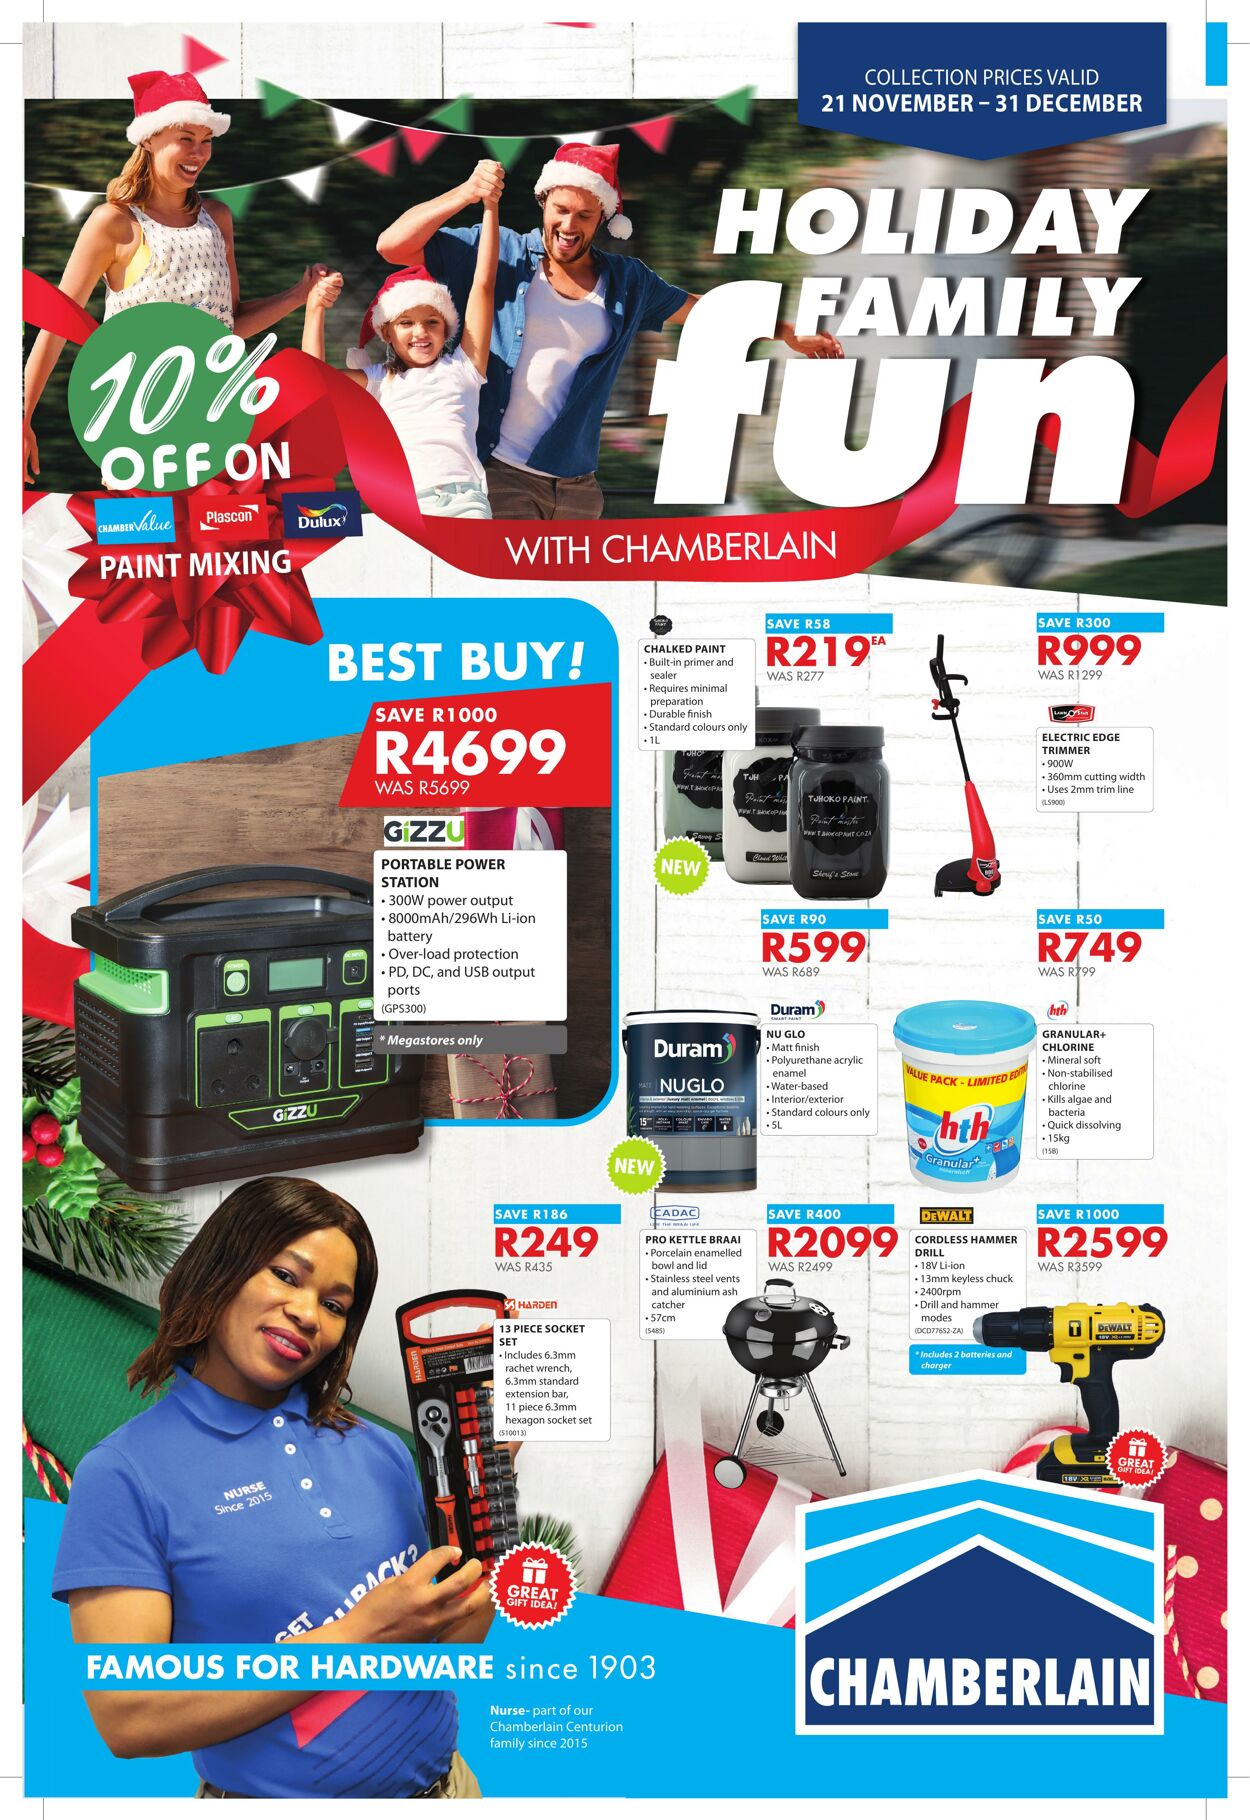 Chamberlain Promotional specials